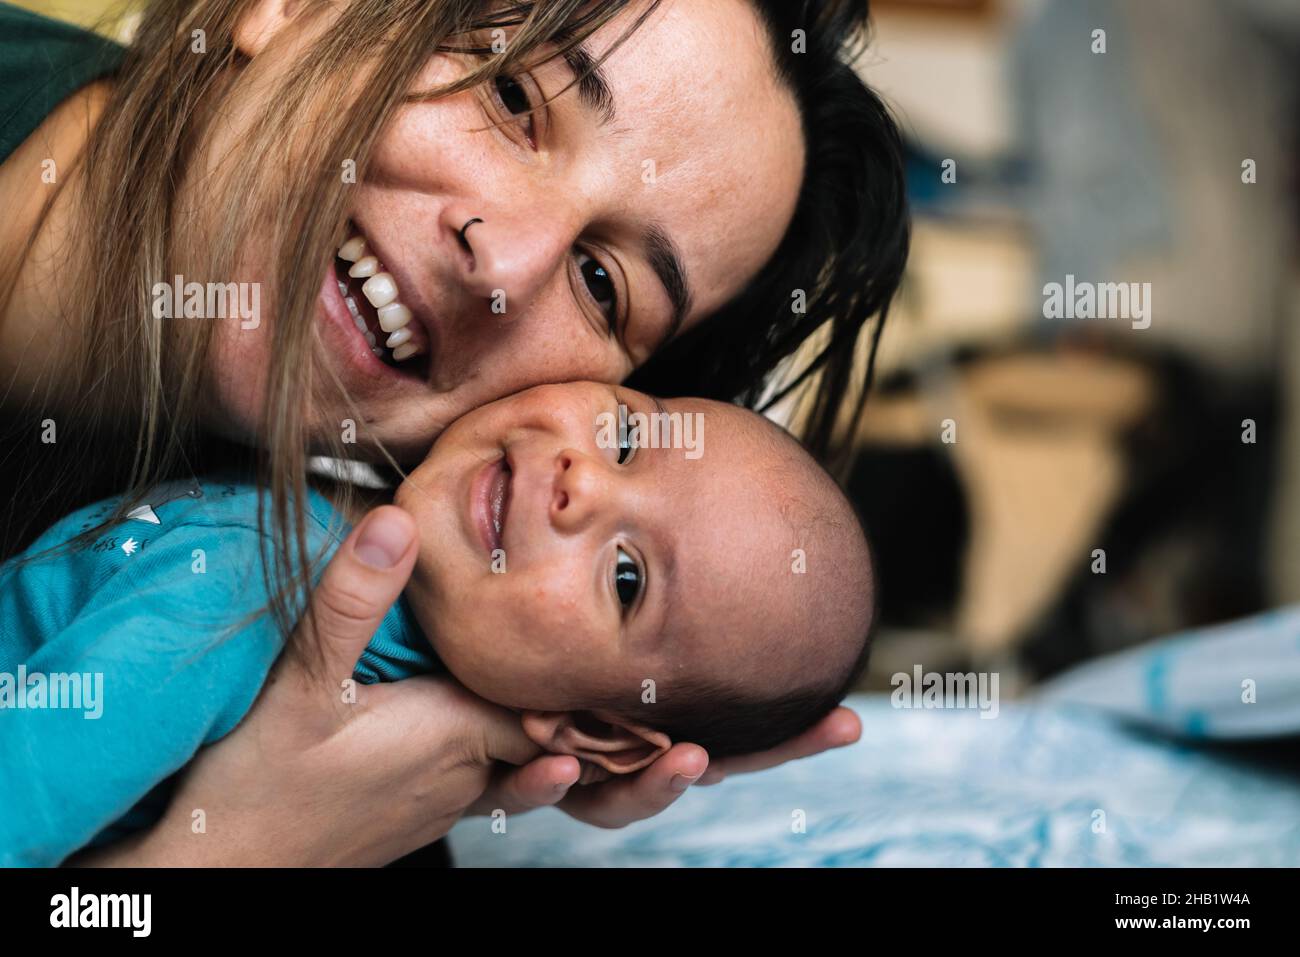 Portrait of a young woman smiling with her baby. Stock Photo